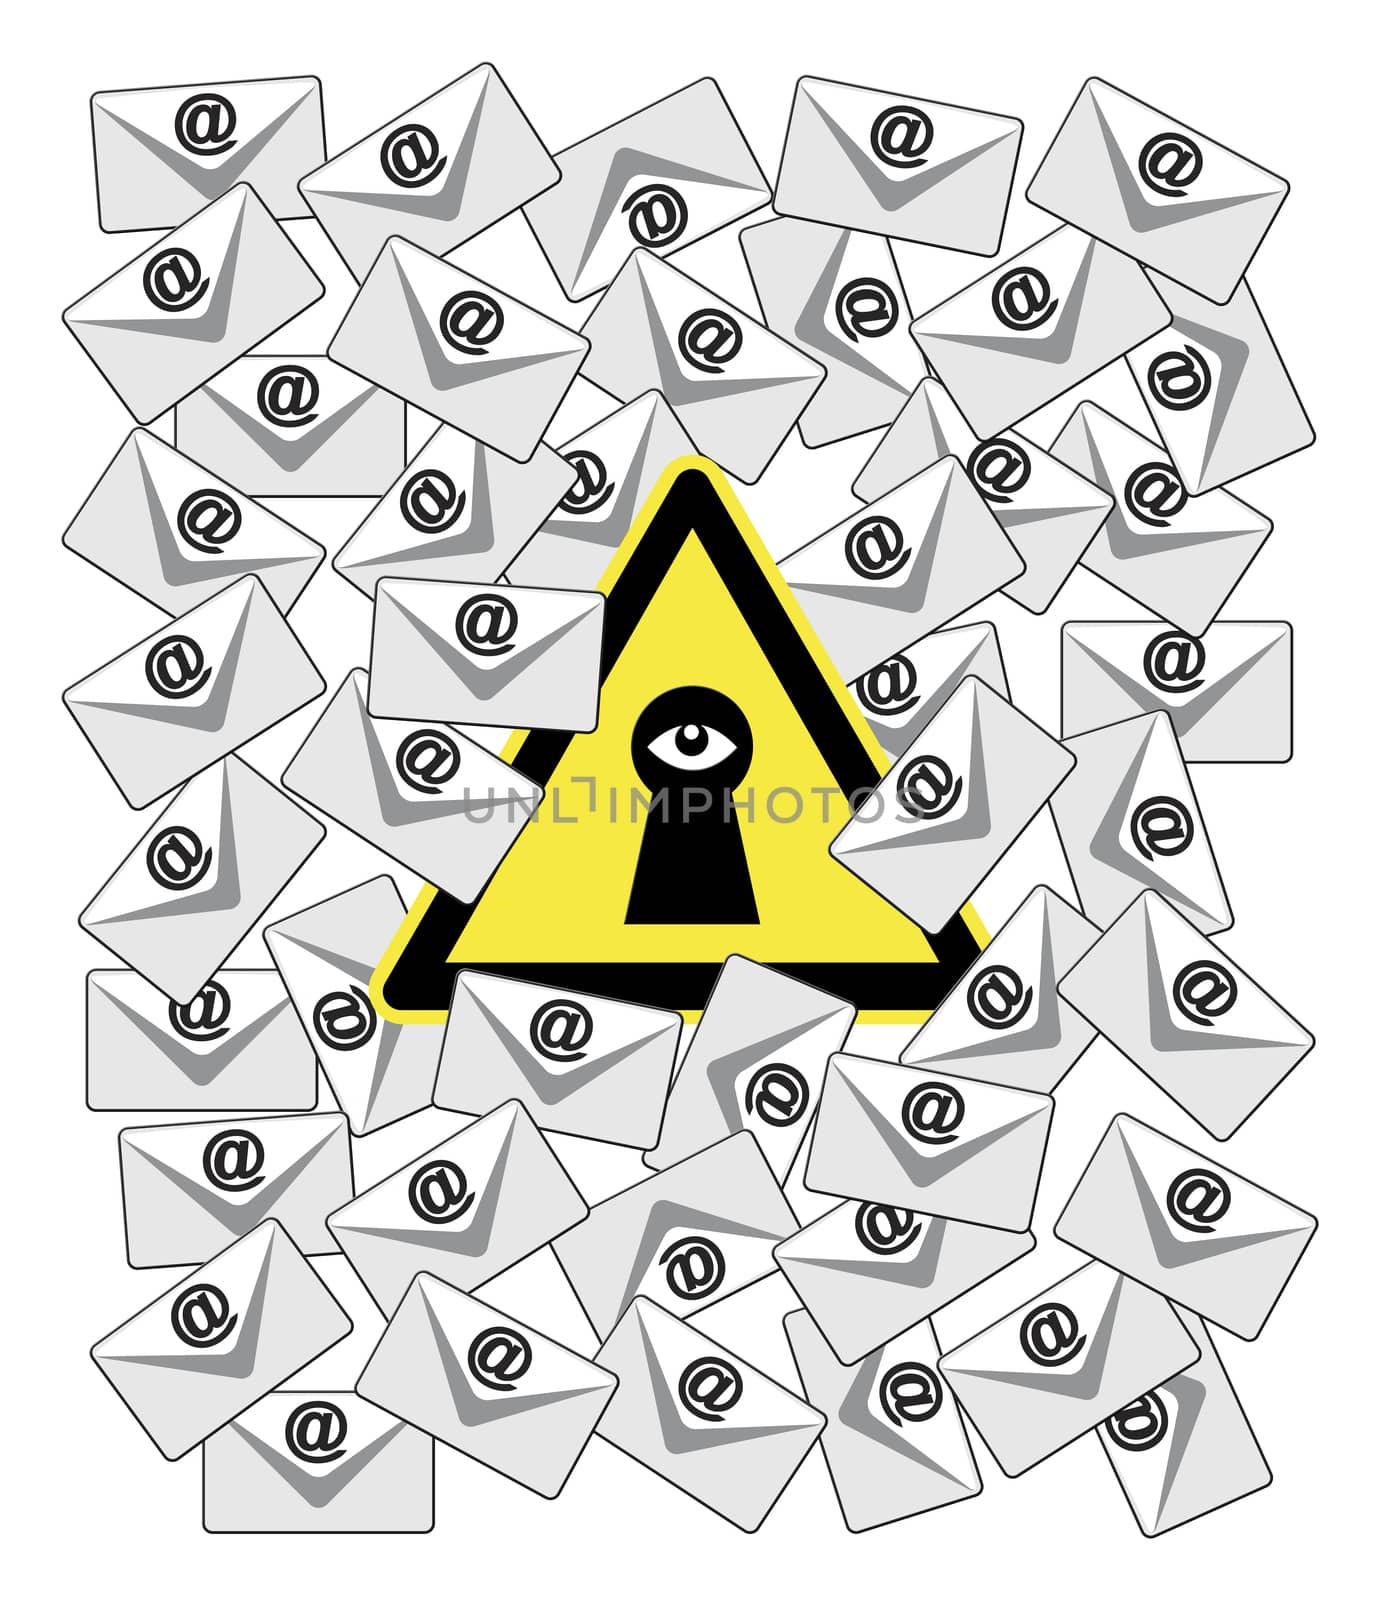 Caution Email Spy by Bambara